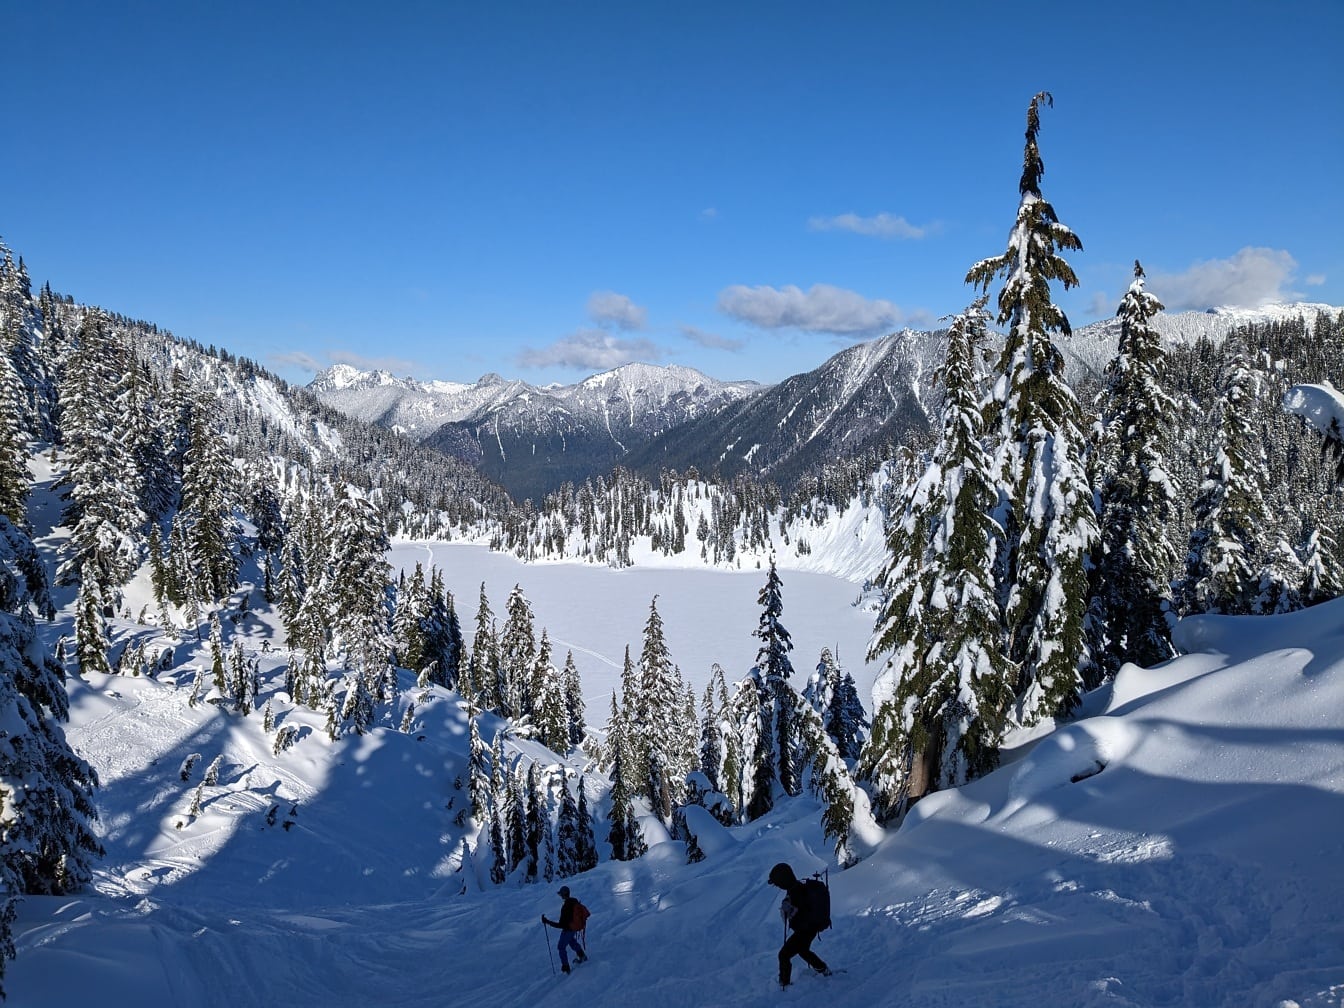 Skiers on snowy mountain slope in hiking winter adventure